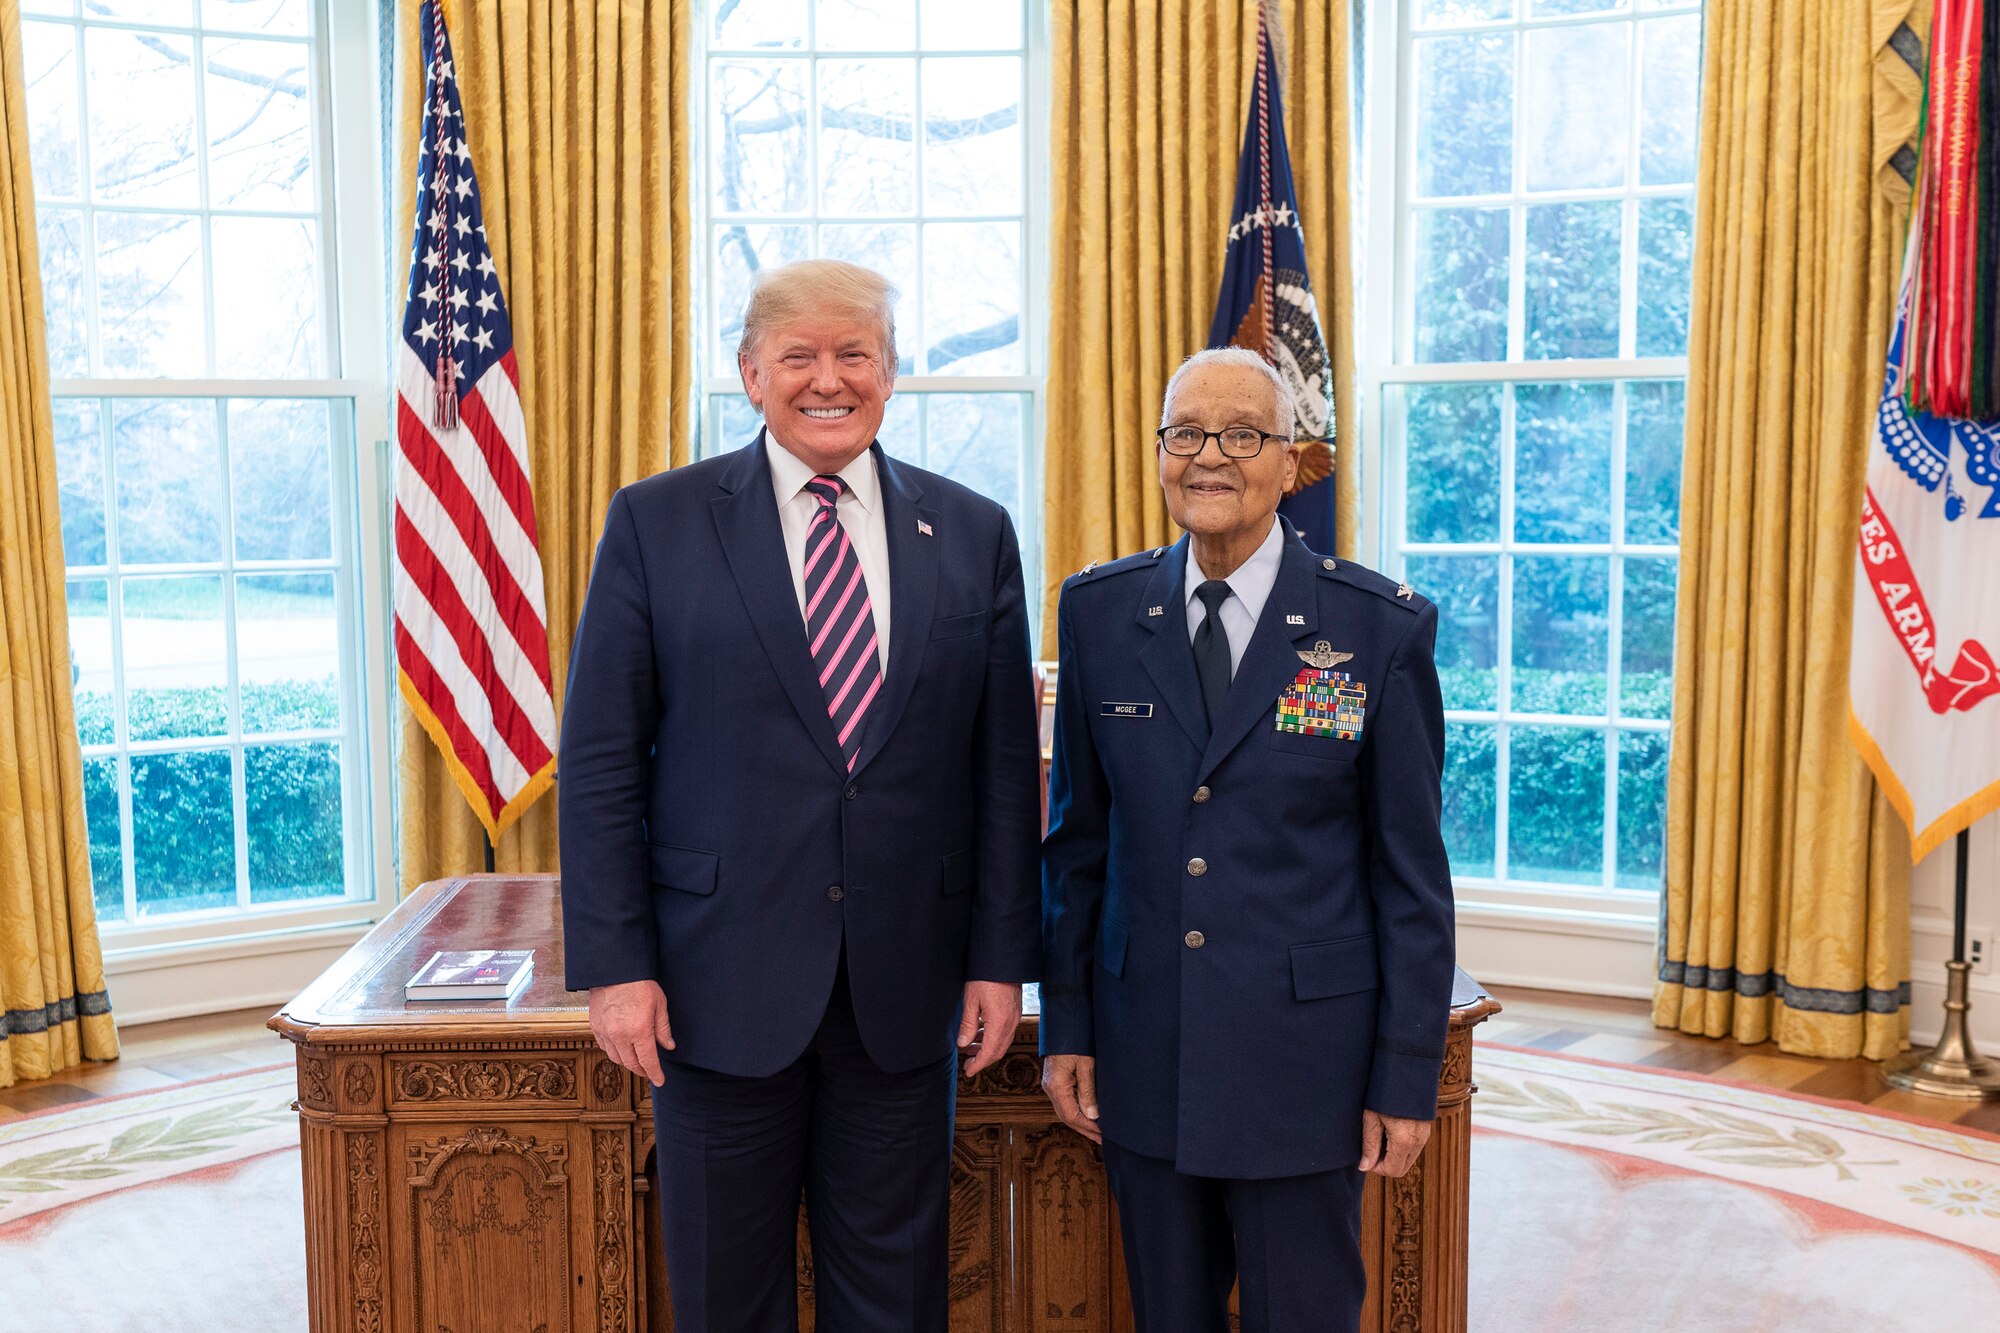 President Donald J. Trump welcomes State of the Union Gallery guest and Tuskegee Airman, retired Col. Charles McGee, Feb. 4, 2020, to the Oval Office of the White House before McGhee’s promotion to brigadier general. (Official White House Photo by Shealah Craighead)